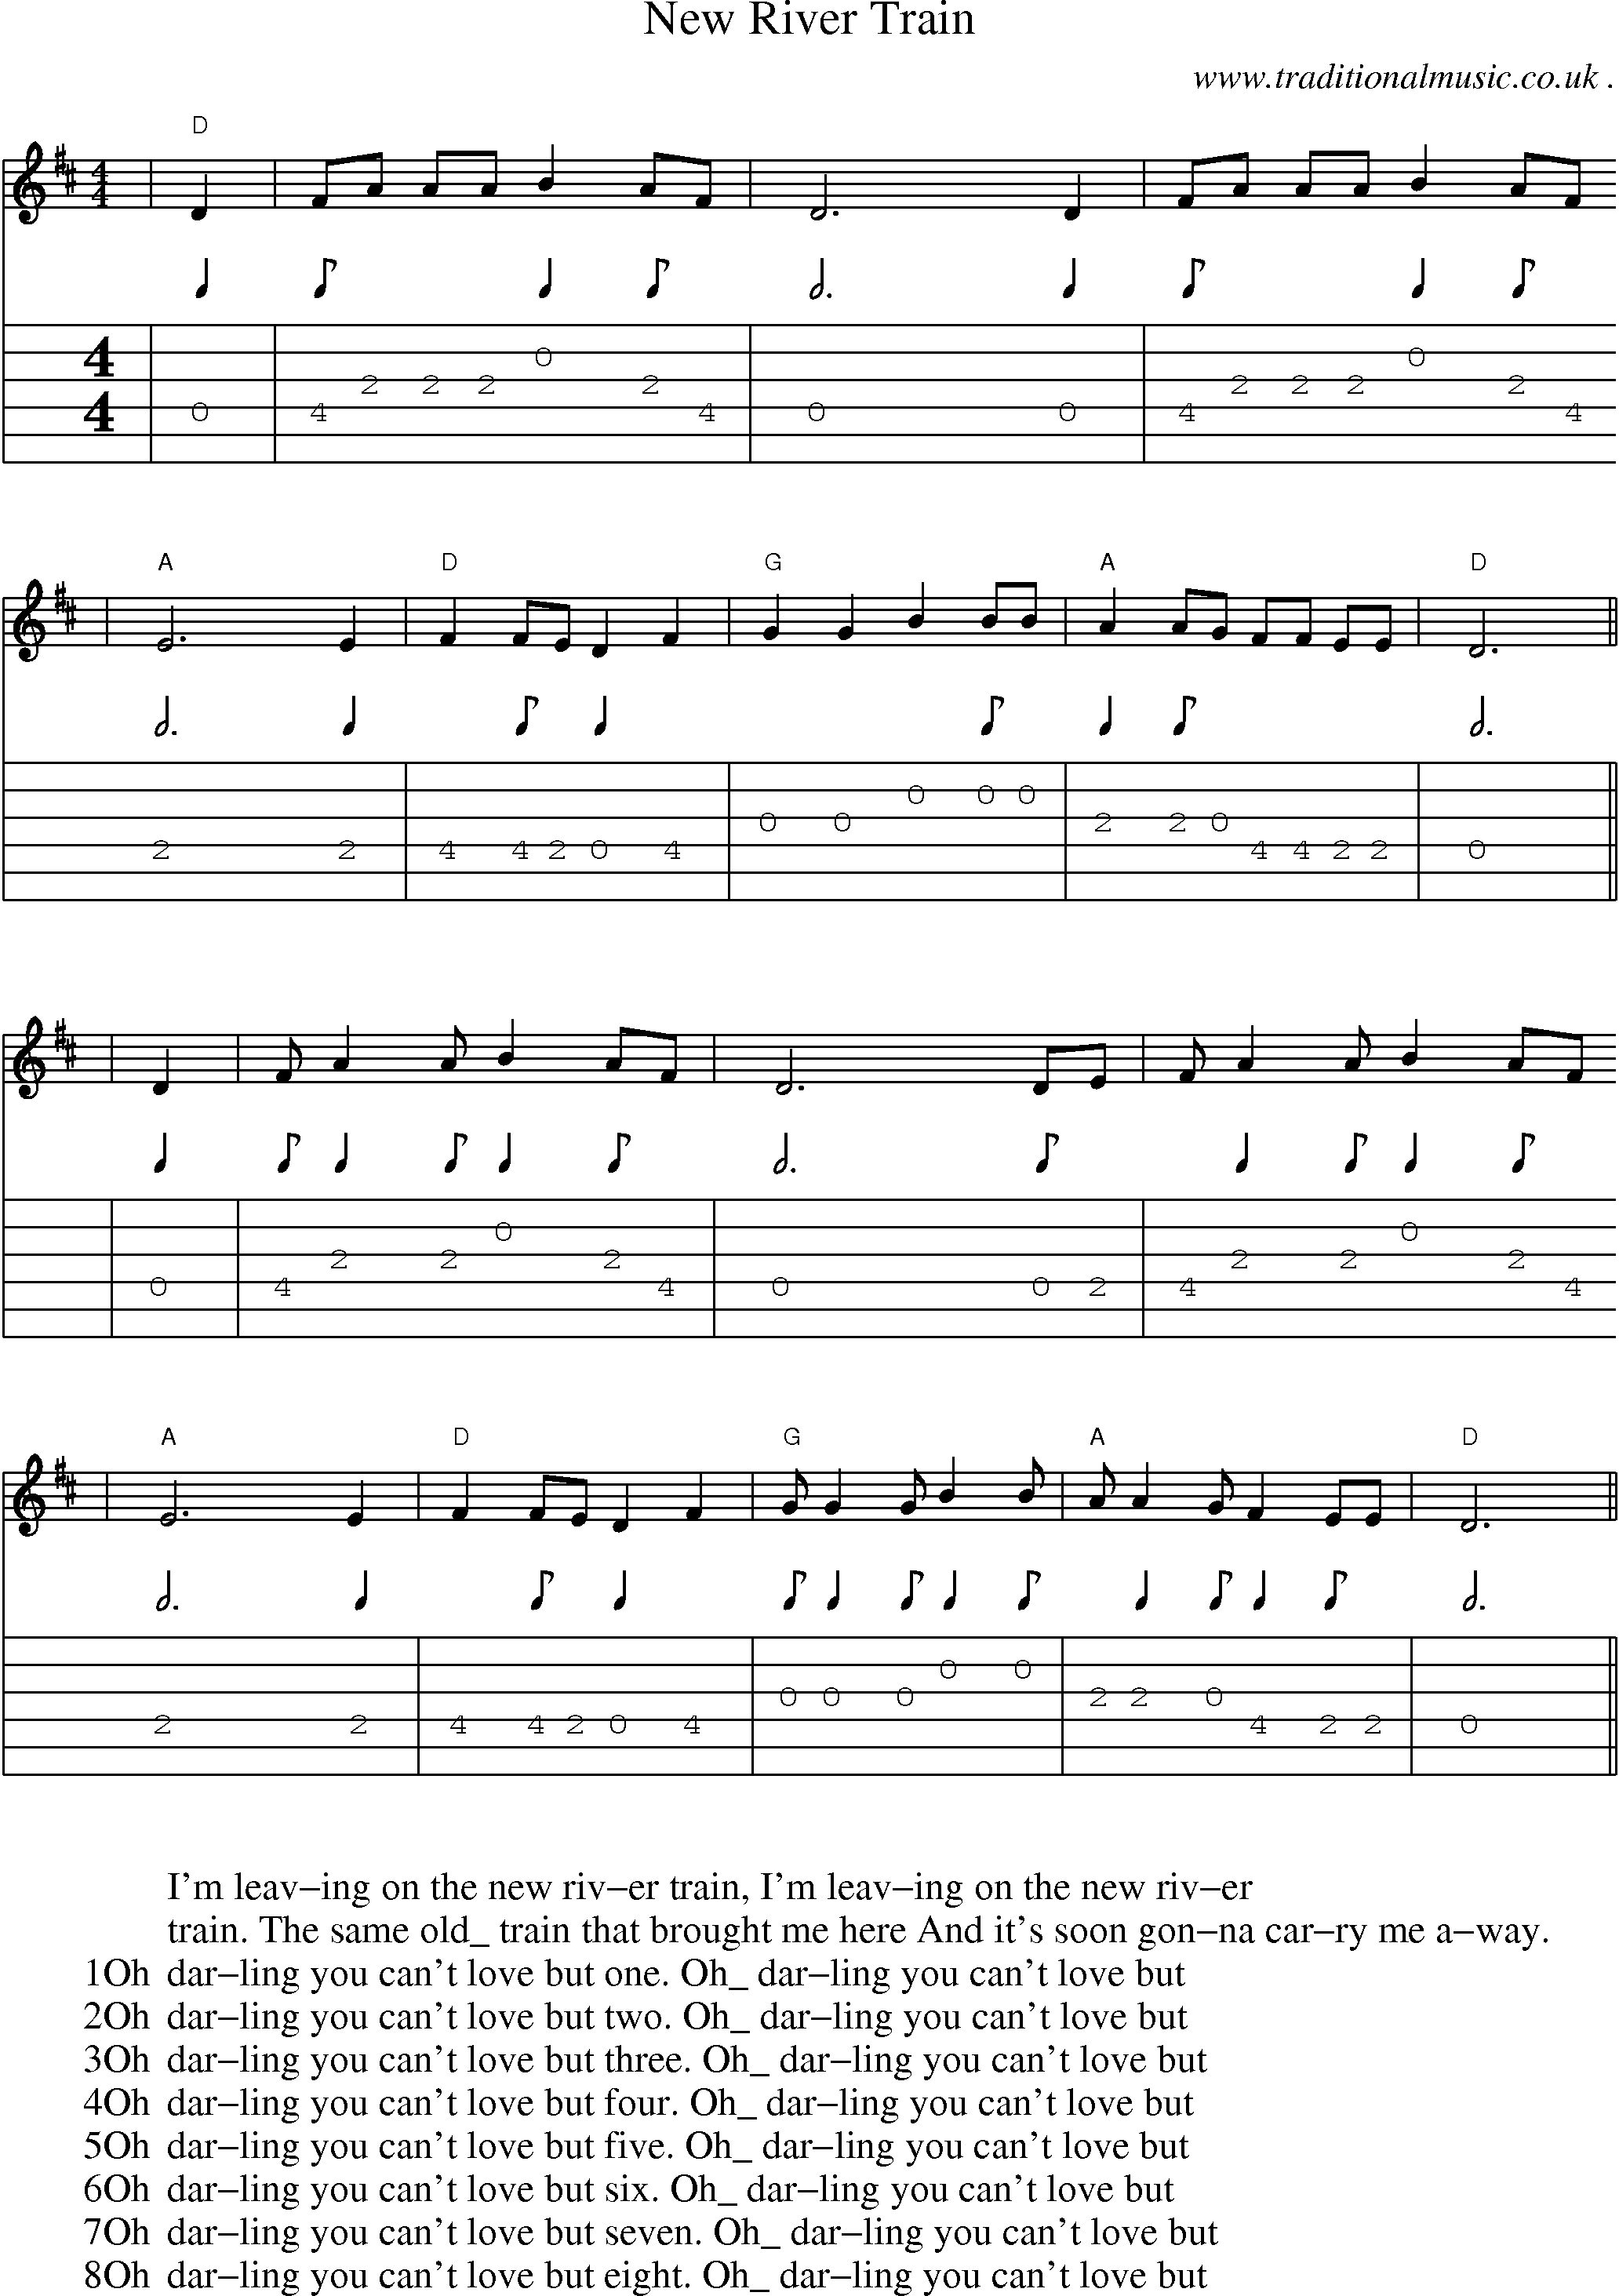 Music Score and Guitar Tabs for New River Train